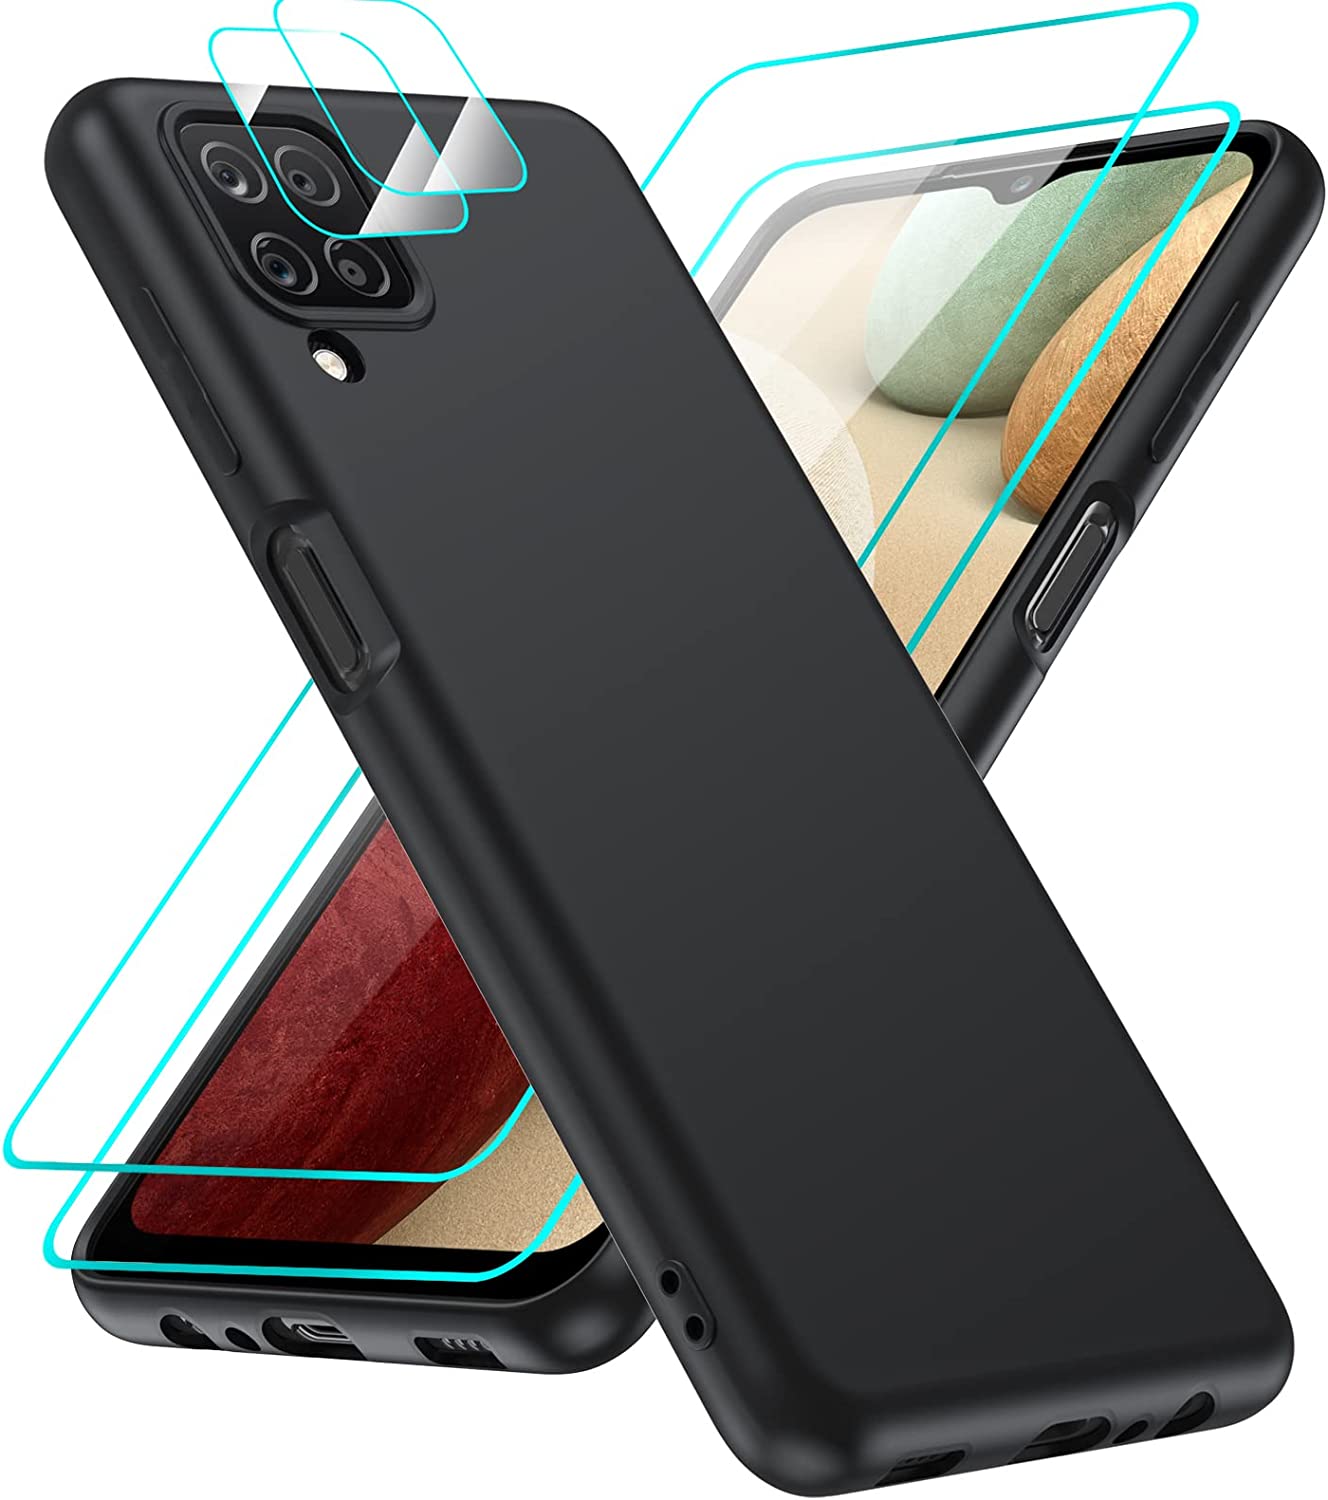 LeYi Samsung A12 Case Case with [2 Pack] Tempered Glass Screen Protector & Camera Lens Protector, Liquid Silicone Slim Silky-Soft Protective Case Black